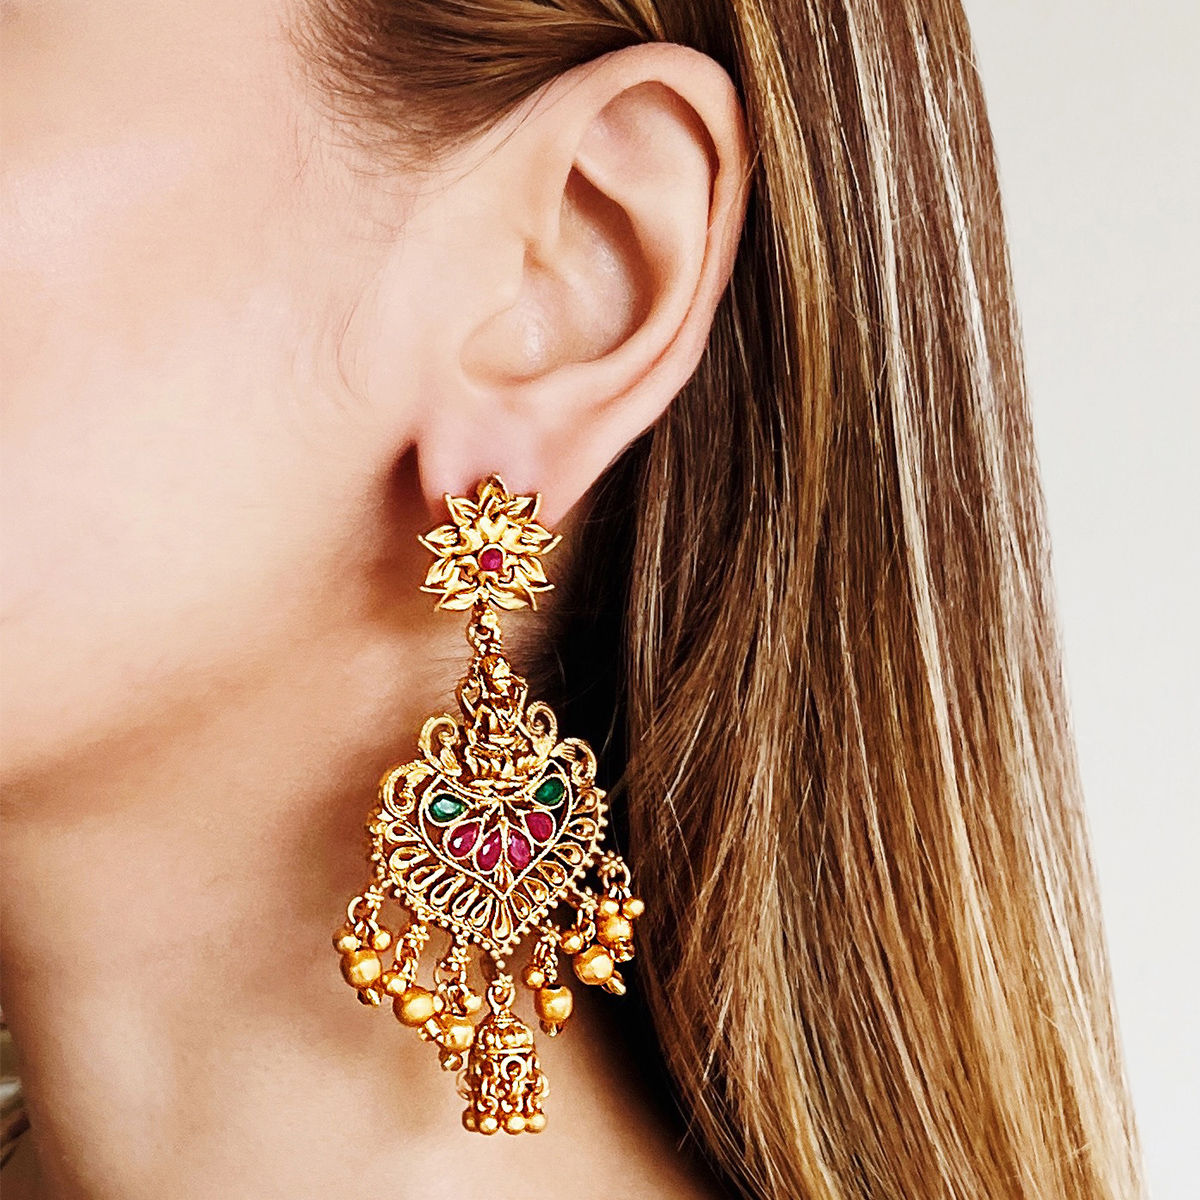 Carlton London Fashion Jewellery Gold Earrings Buy Carlton London Fashion  Jewellery Gold Earrings Online at Best Price in India  Nykaa